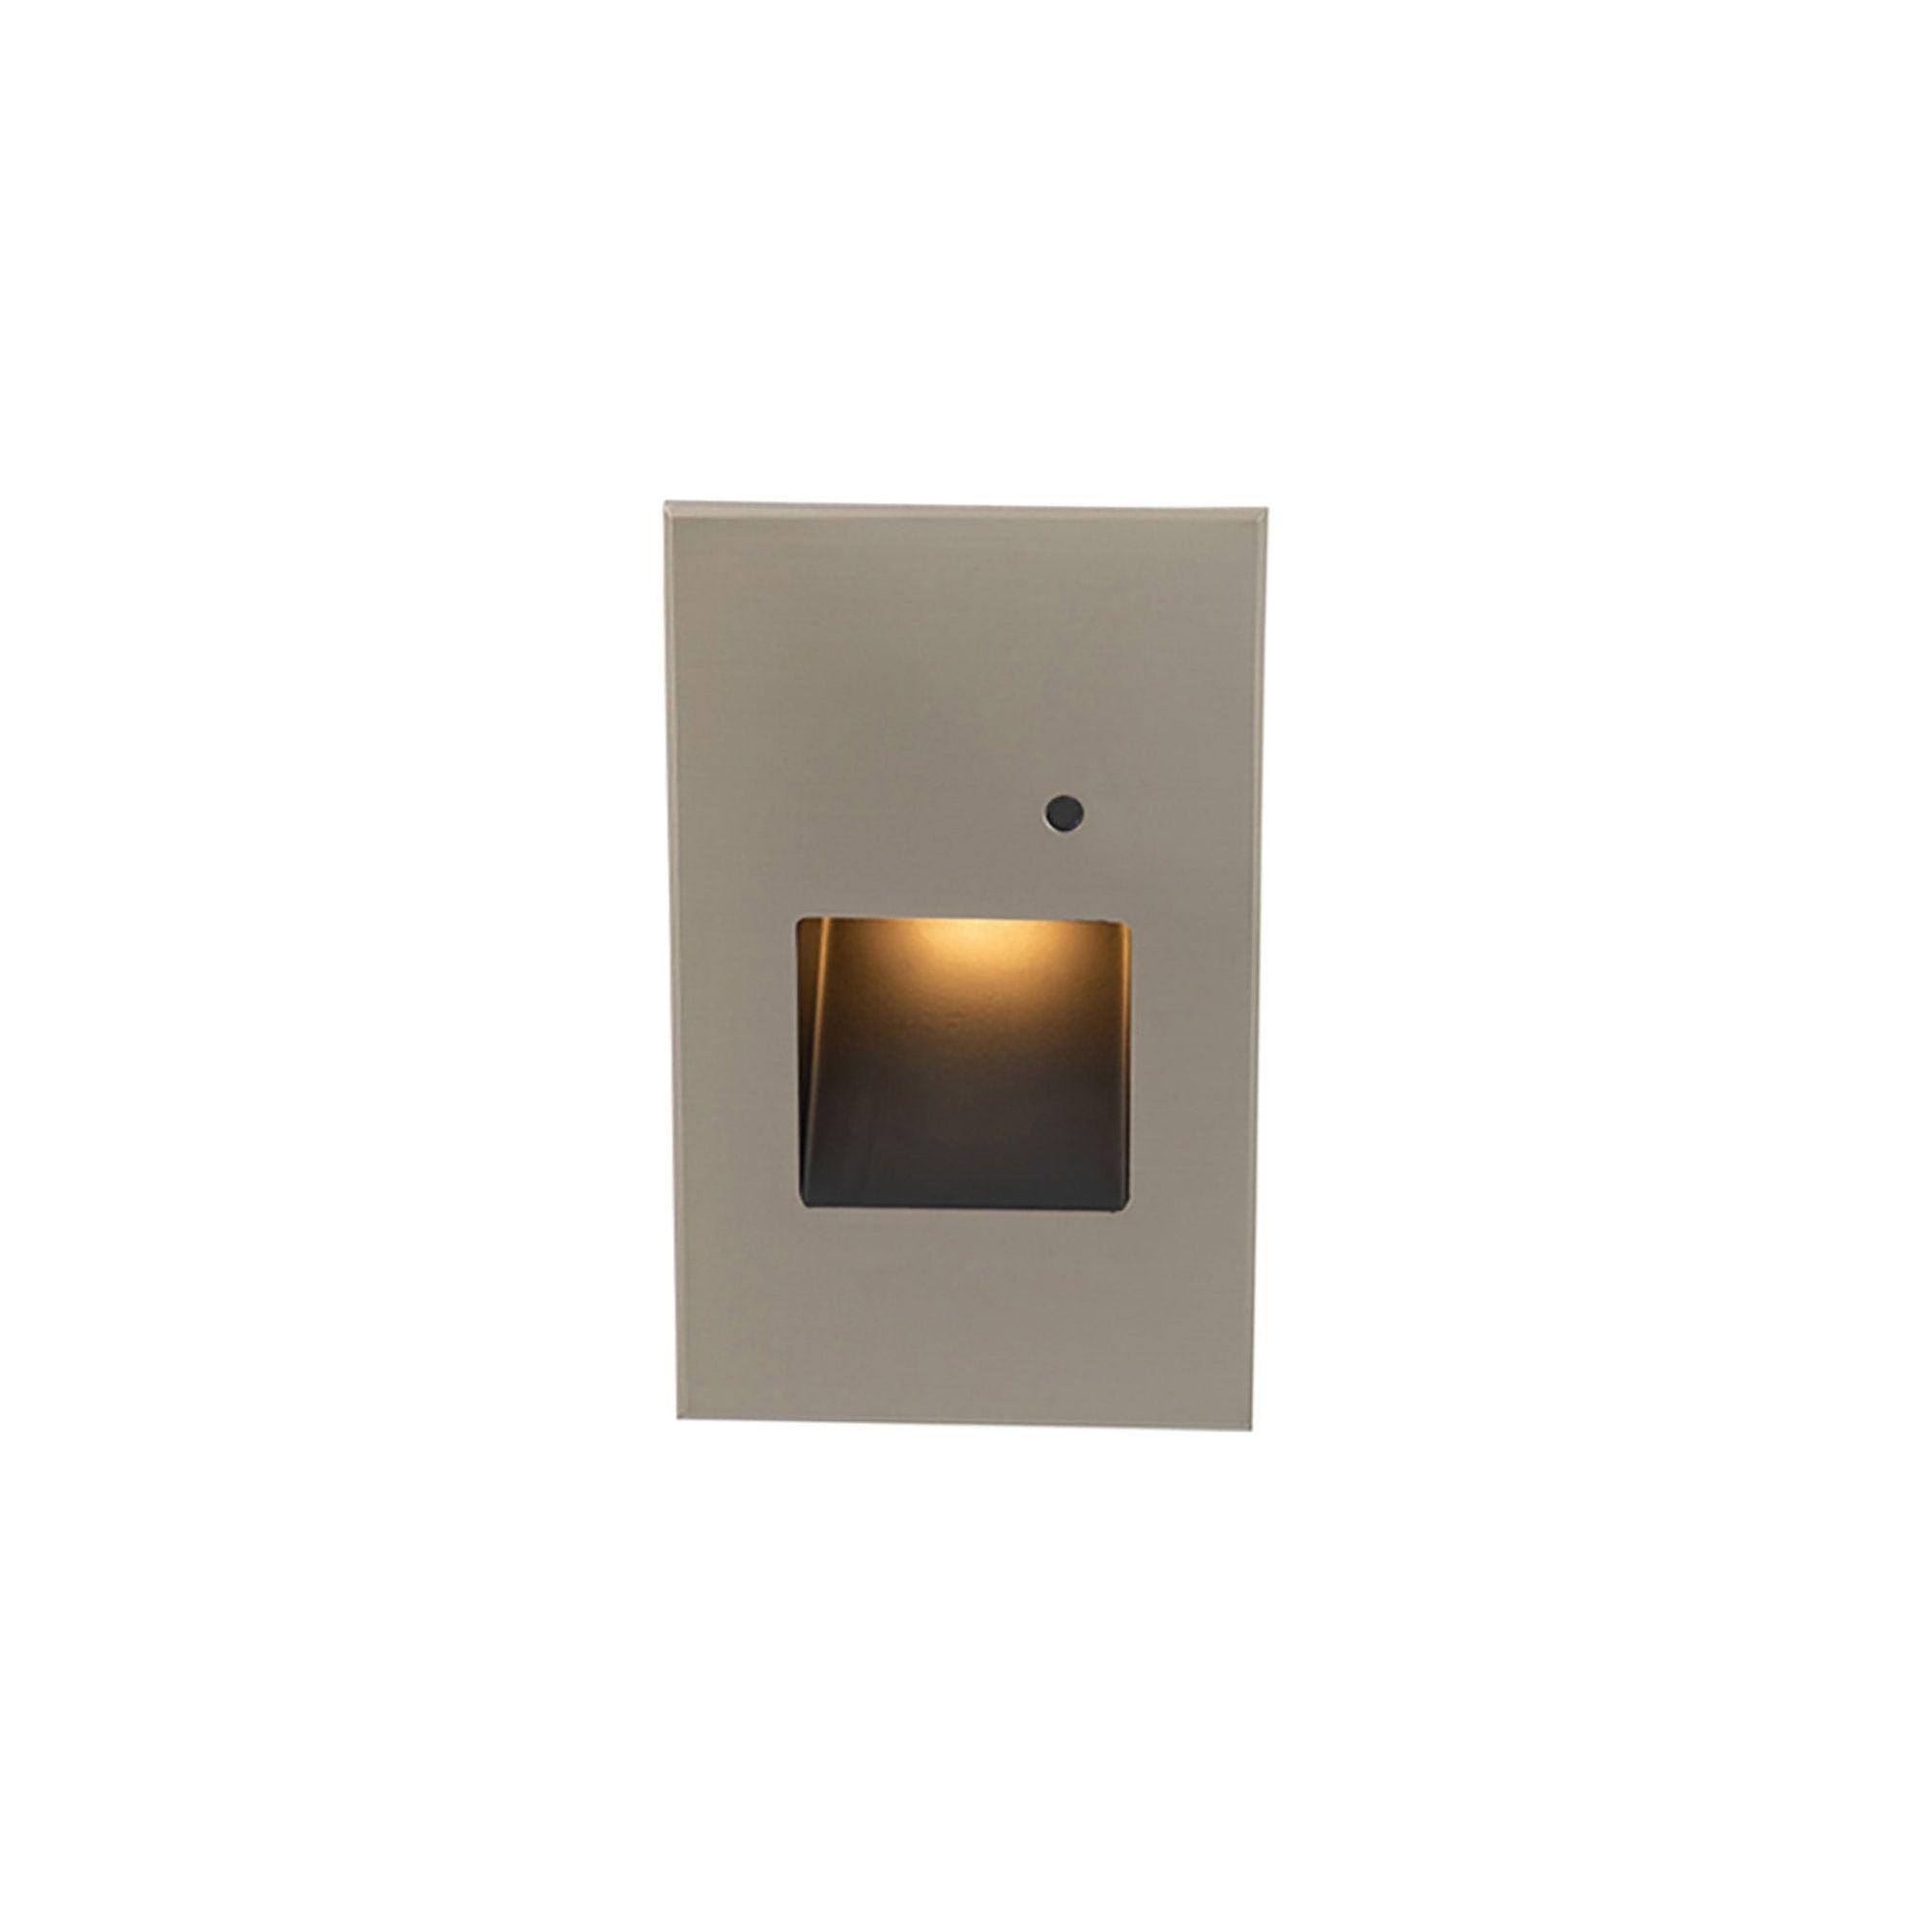 WAC Lighting - LEDme 120V LED Vertical Indoor/Outdoor Step and Wall Light with Daylight Photocell Sensor - Lights Canada